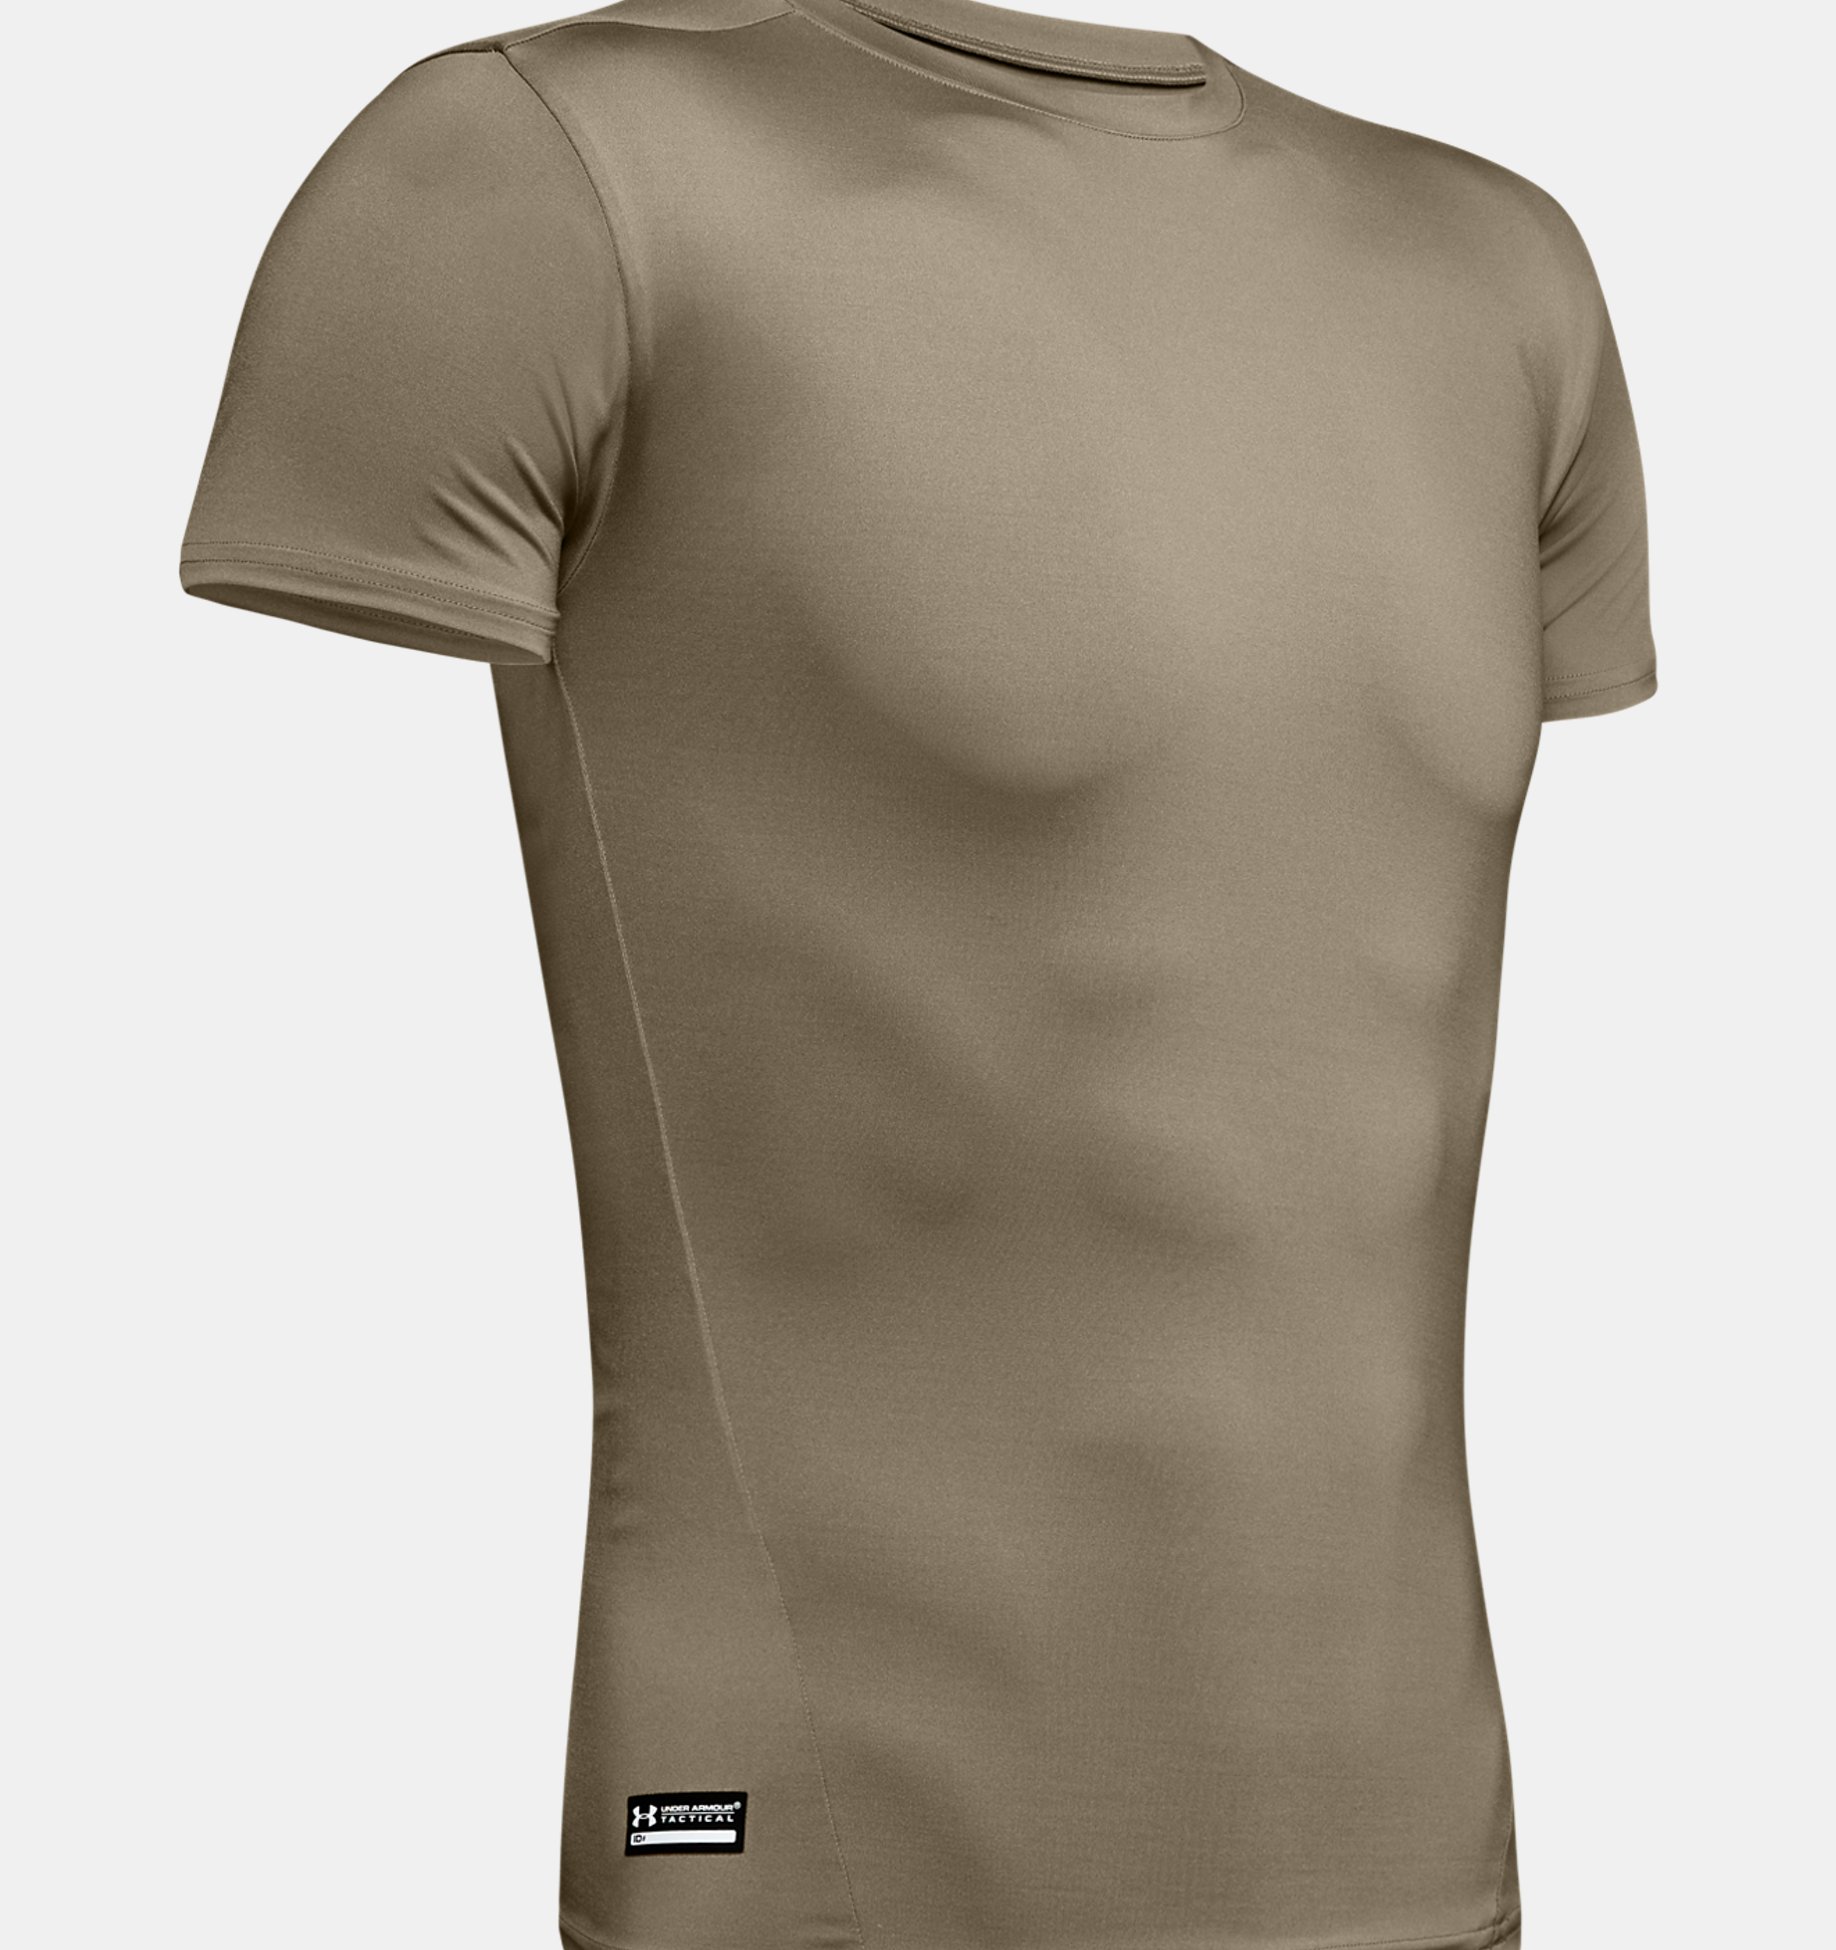 Mens Compression Thermal Under Base Layer Top Short Sleeve Armour Jersey T-shirt 